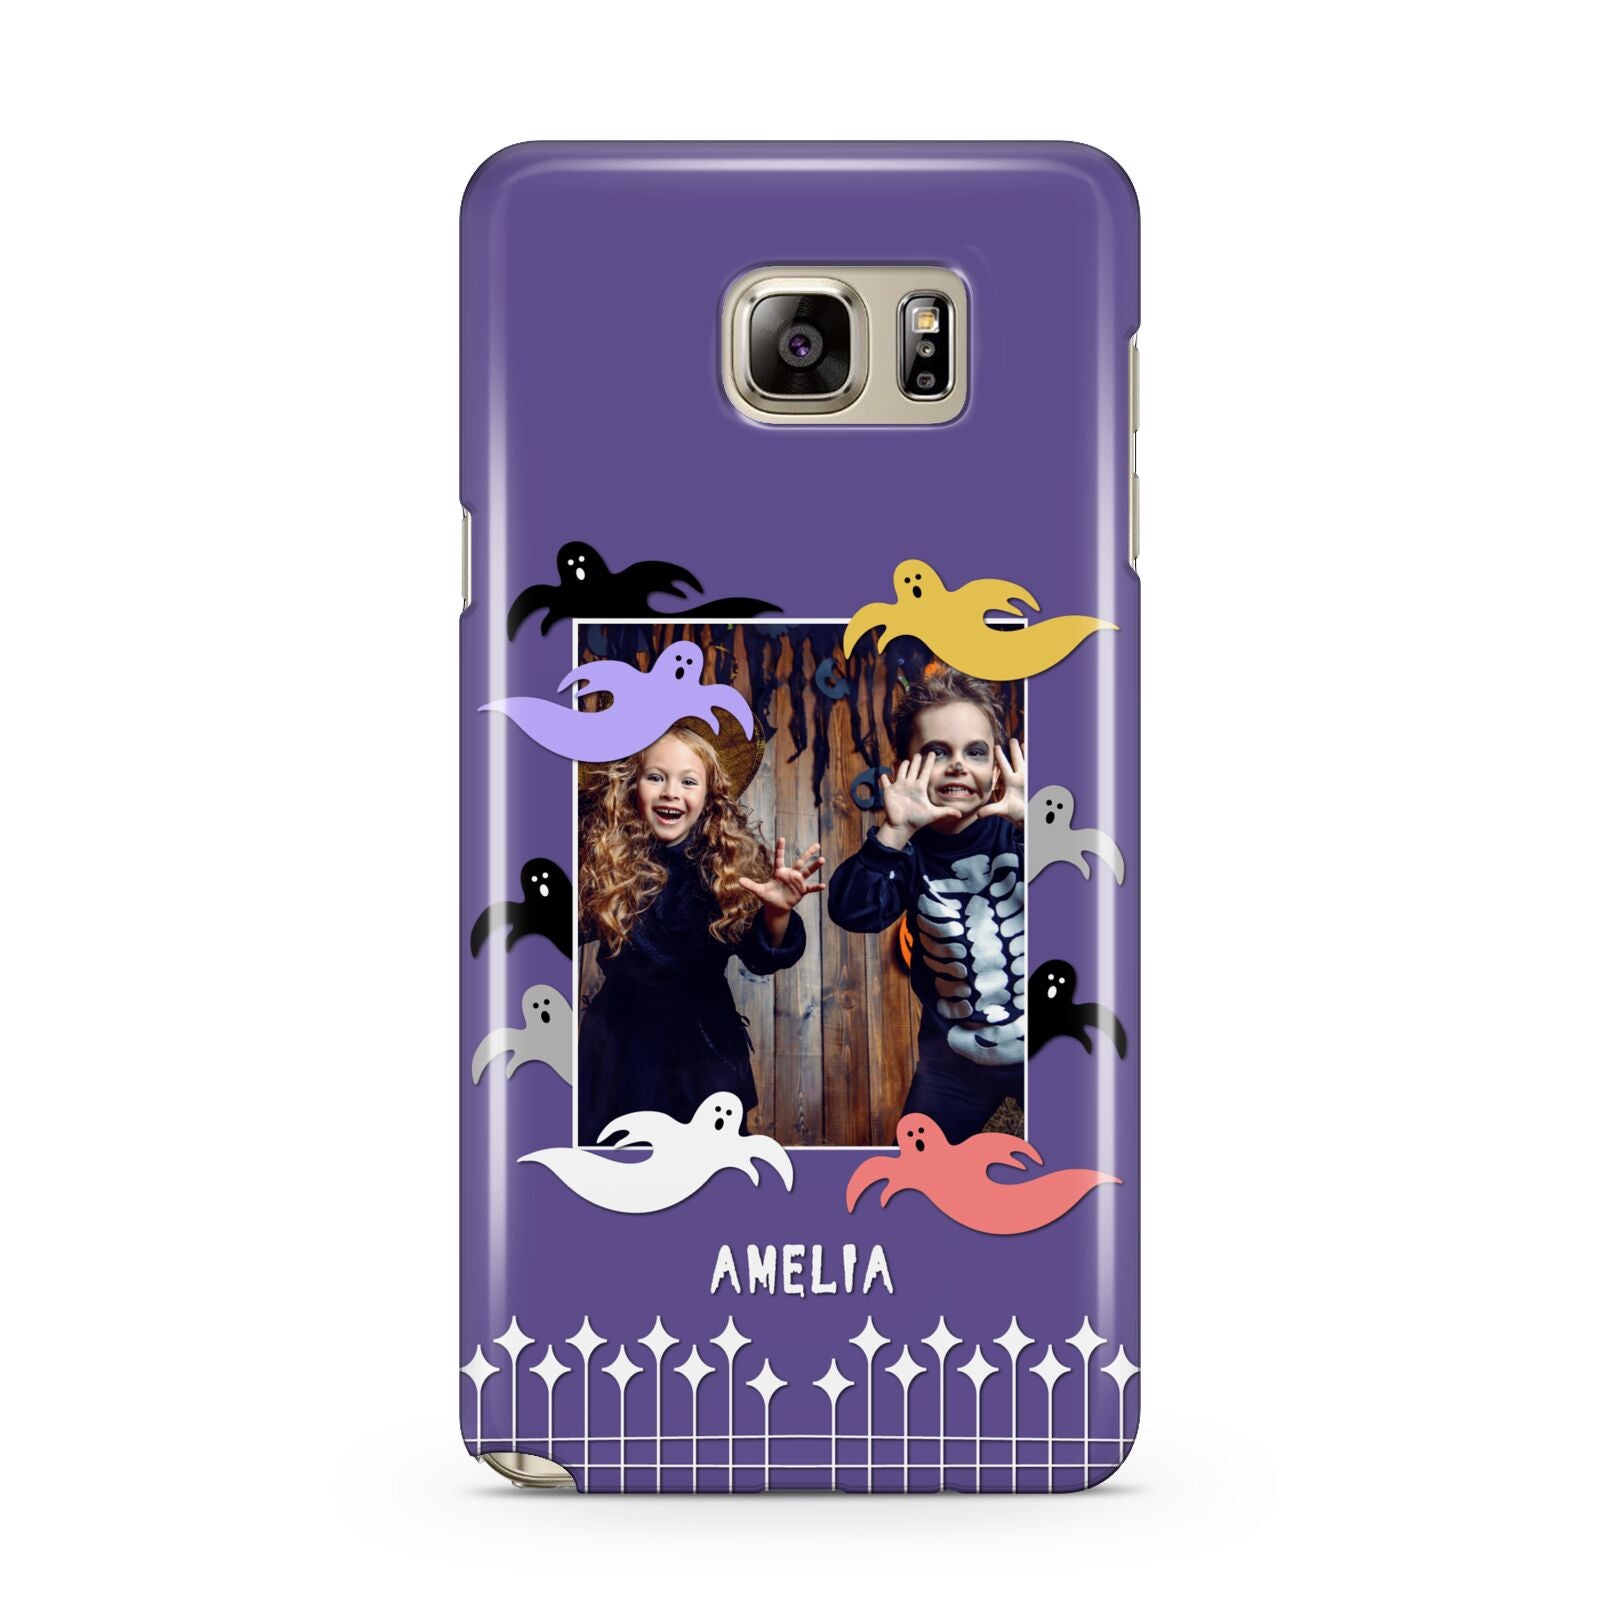 Personalised Halloween Photo Upload Samsung Galaxy Note 5 Case